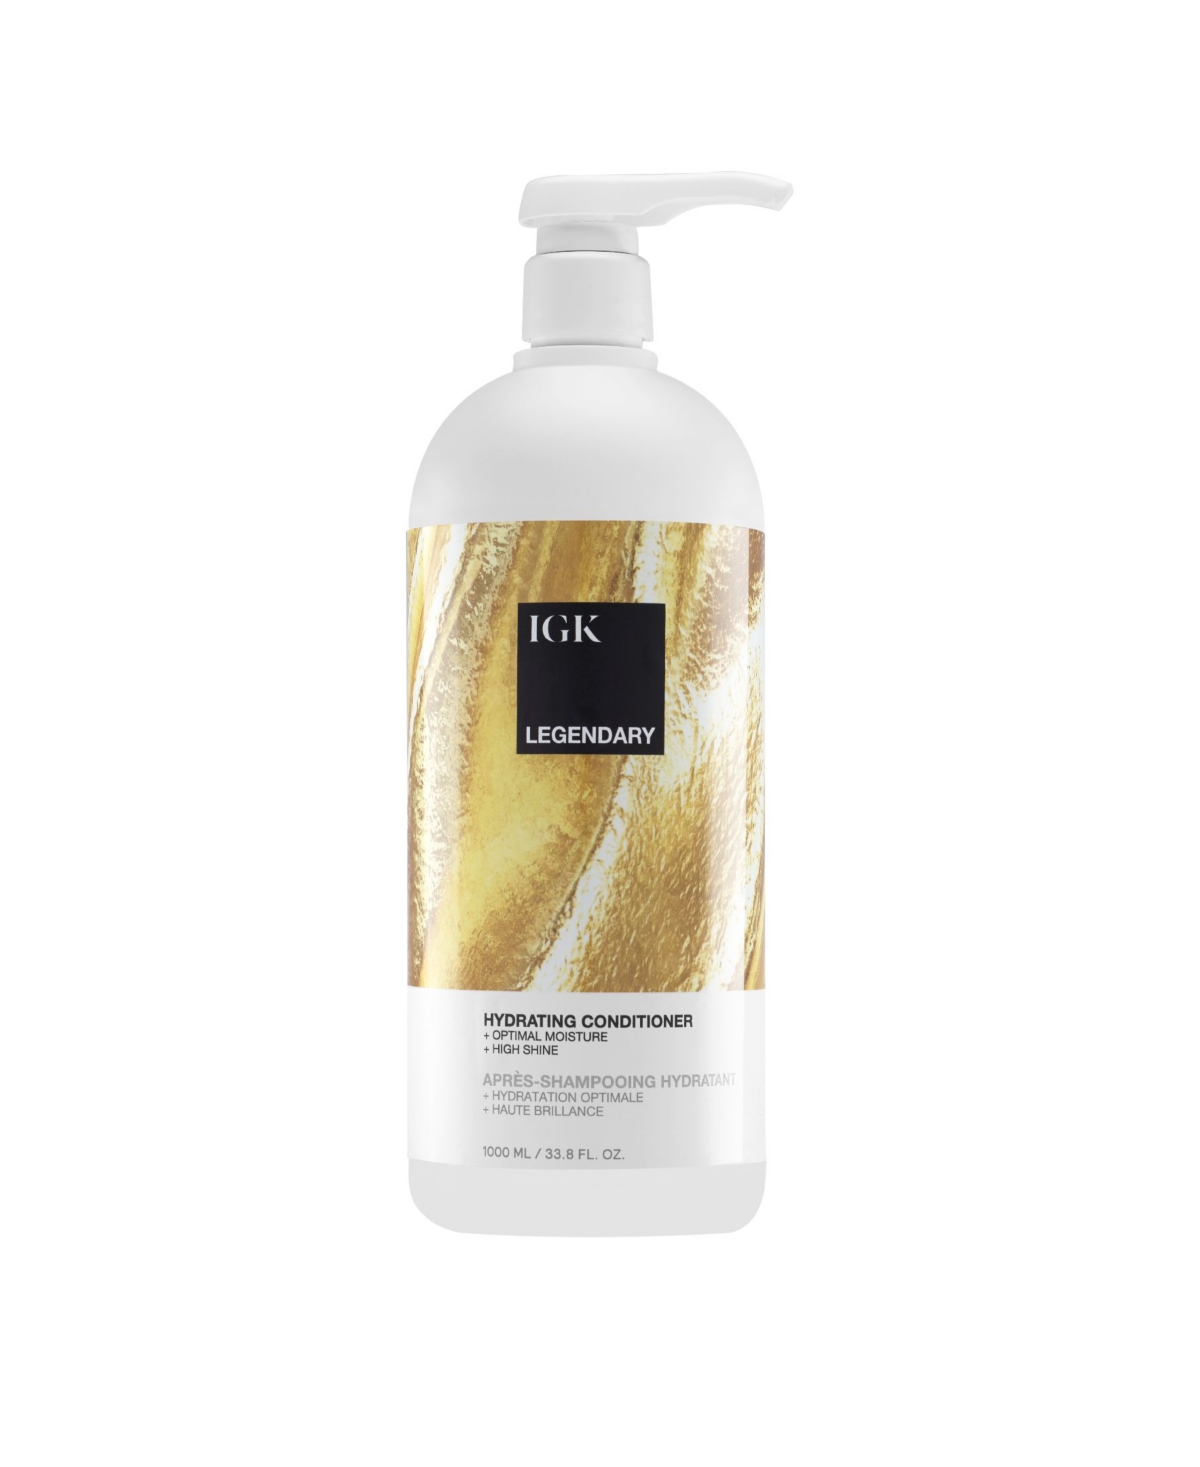 Igk Hair Legendary Dream Hair Conditioner - Liter In No Color